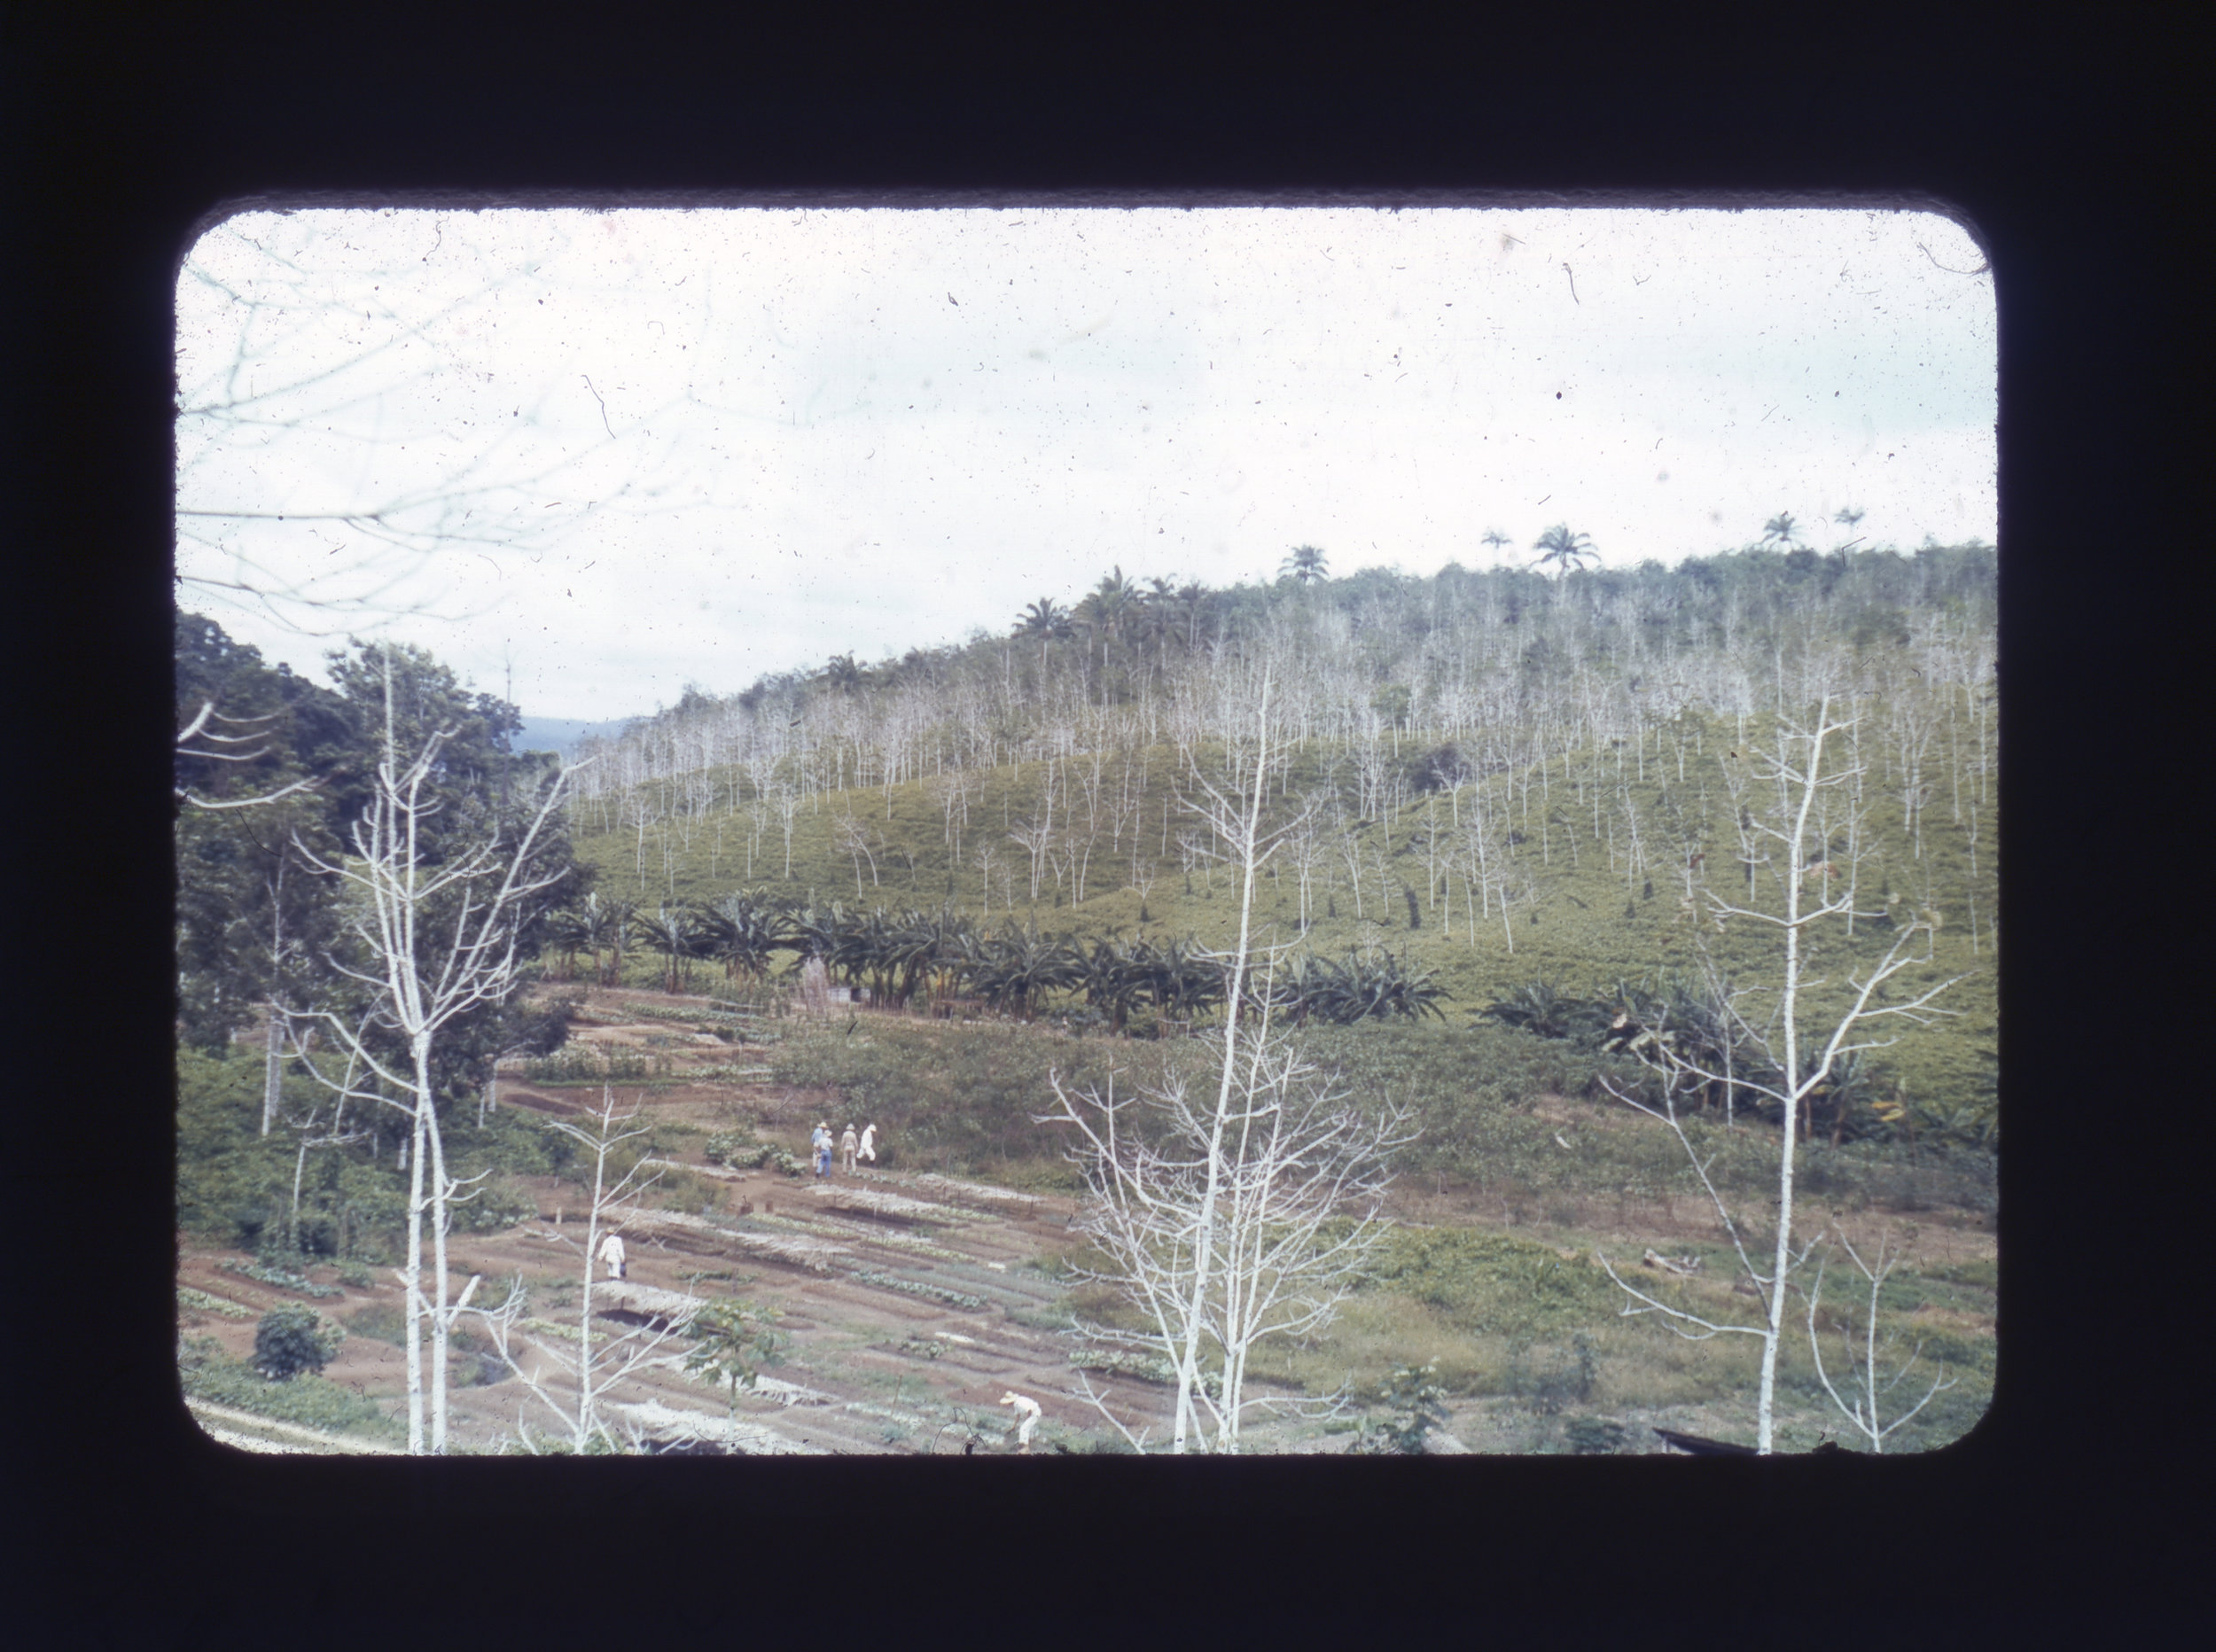  (research image) Untitled. Typed on verso: “Rubber – Ford 3. Fordlandia – view across vegetable garden” 35mm Kodachrome Slide. Creator: Cortland B. Manifold. Courtland Manifold Papers, Archival Services, University Libraries, The University of Akron